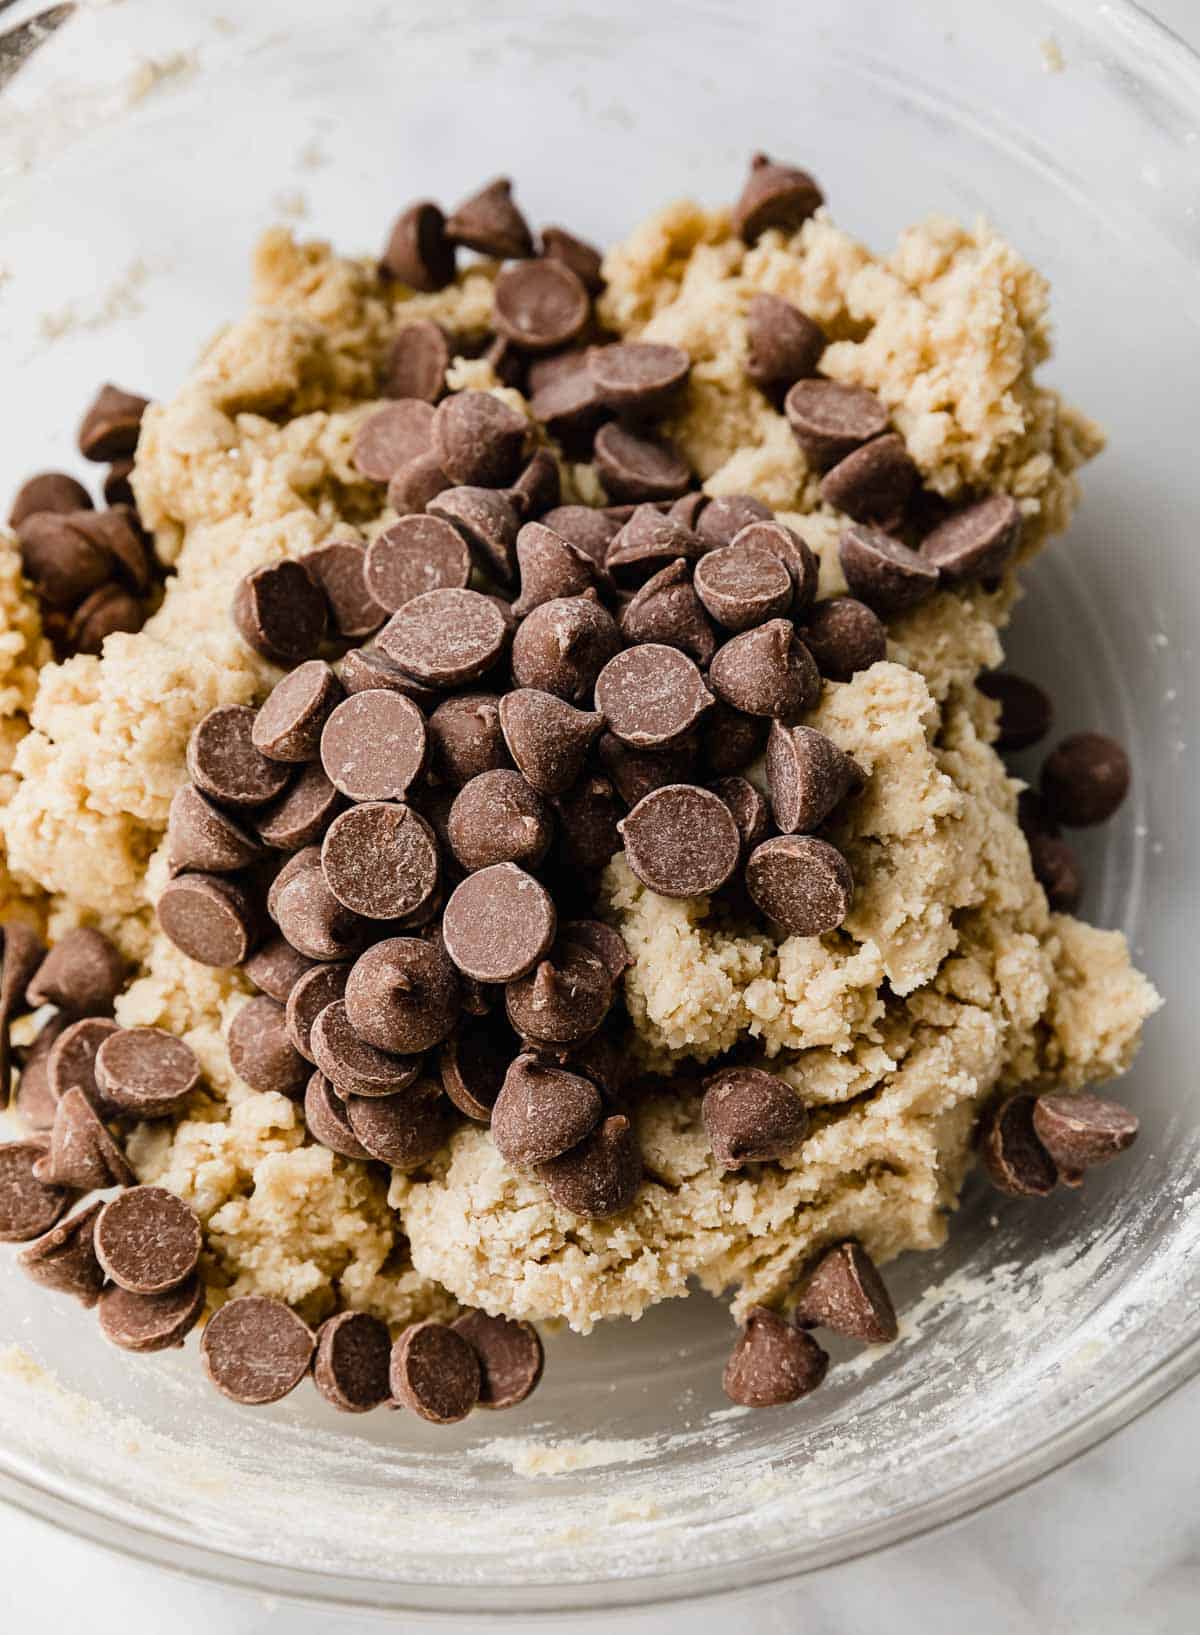 Milk chocolate chips overtop homemade Crumbl chocolate chip cookie dough in a glass bowl.